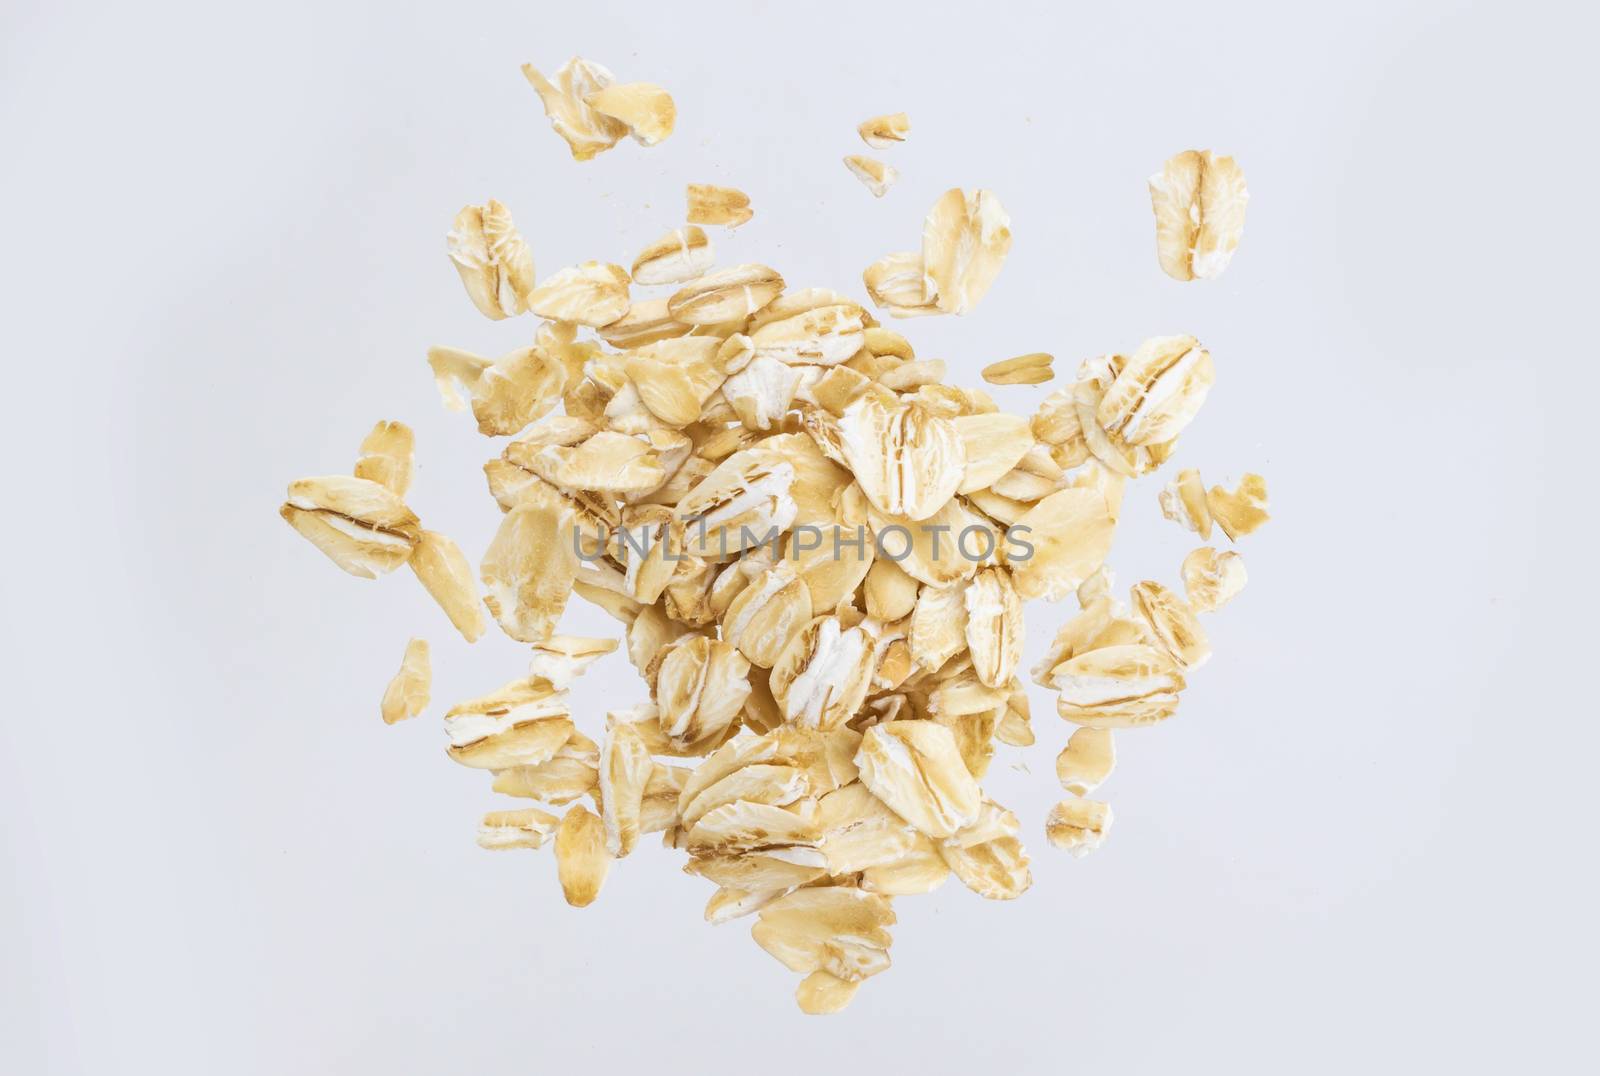 Oat flakes isolated on white background. Top view. Close up.